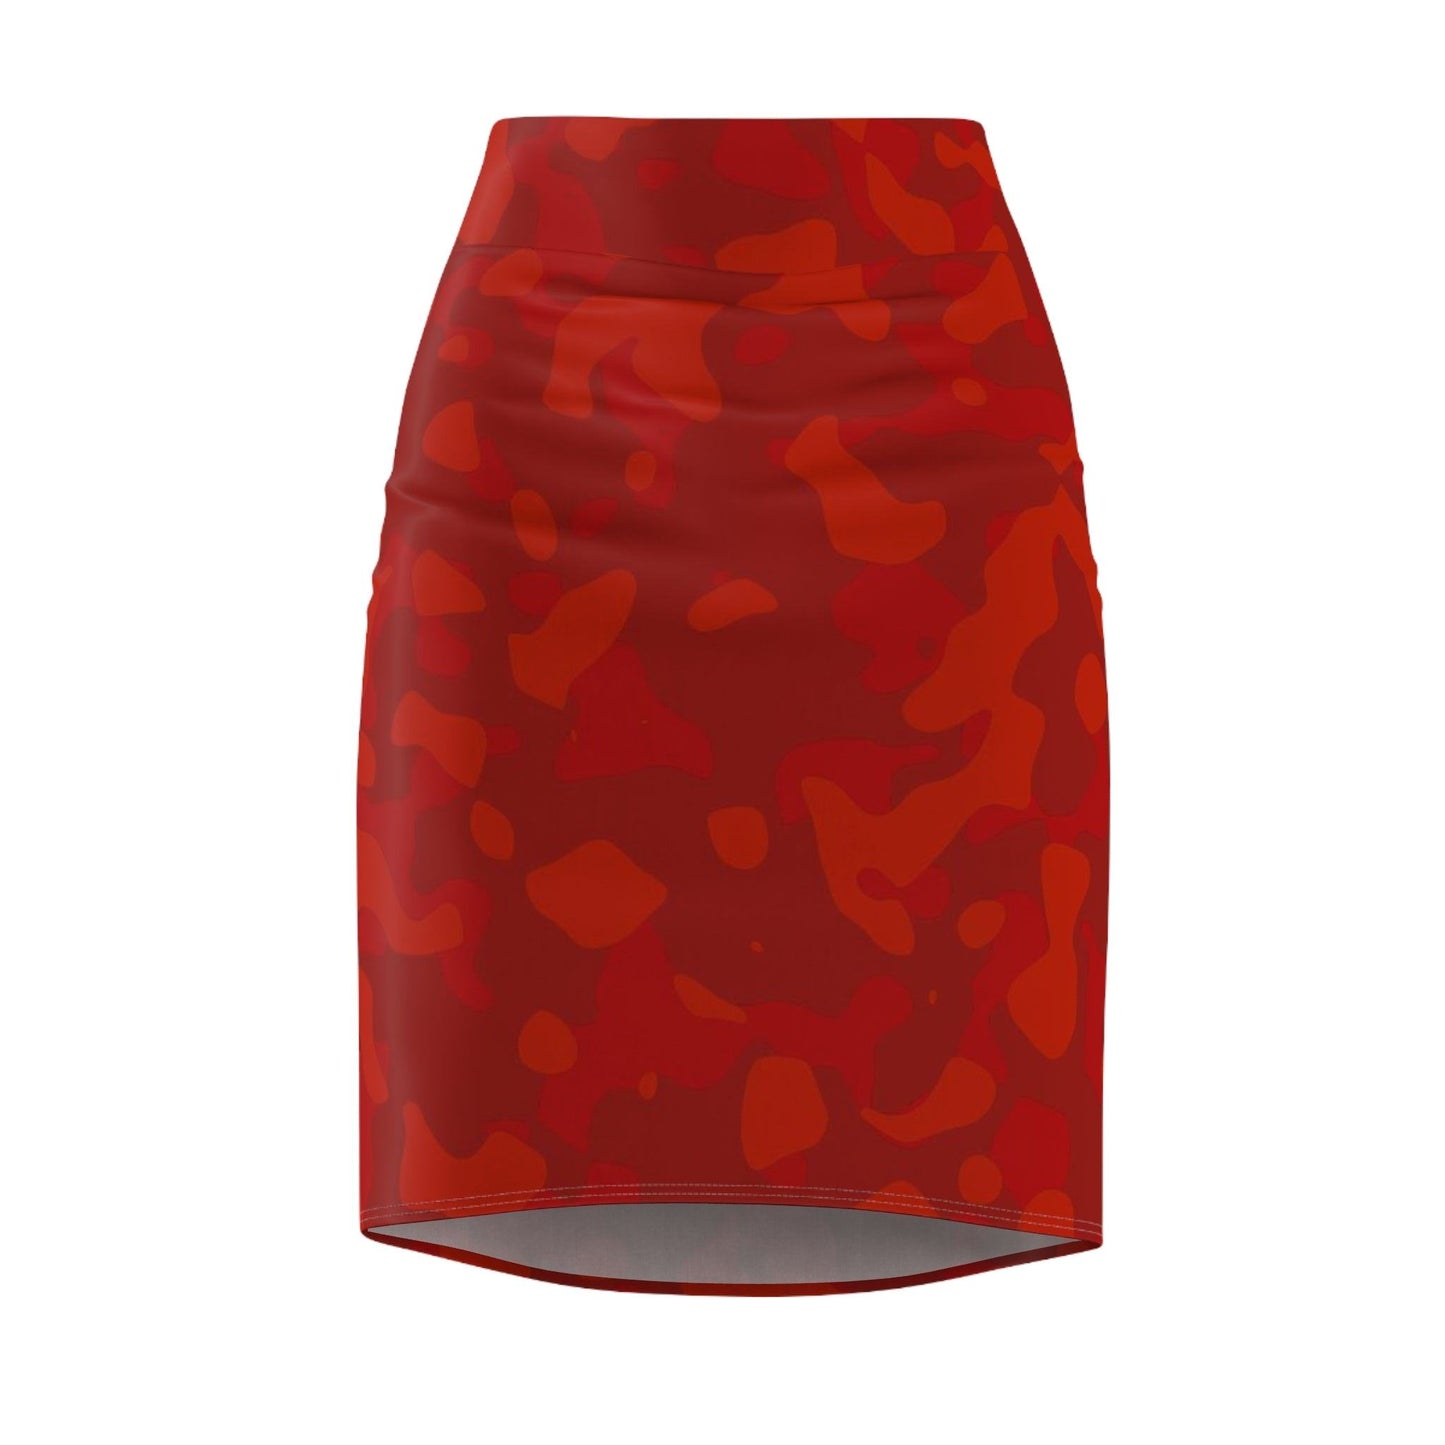 Red Camouflage Bleistiftrock Bleistiftrock 74.99 All Over Print, AOP, AOP Clothing, Assembled in the USA, Assembled in USA, Bleistiftrock, Camouflage, Made in the USA, Made in USA, Red, Skirts & Dresses, Sublimation, Women's Clothing JLR Design